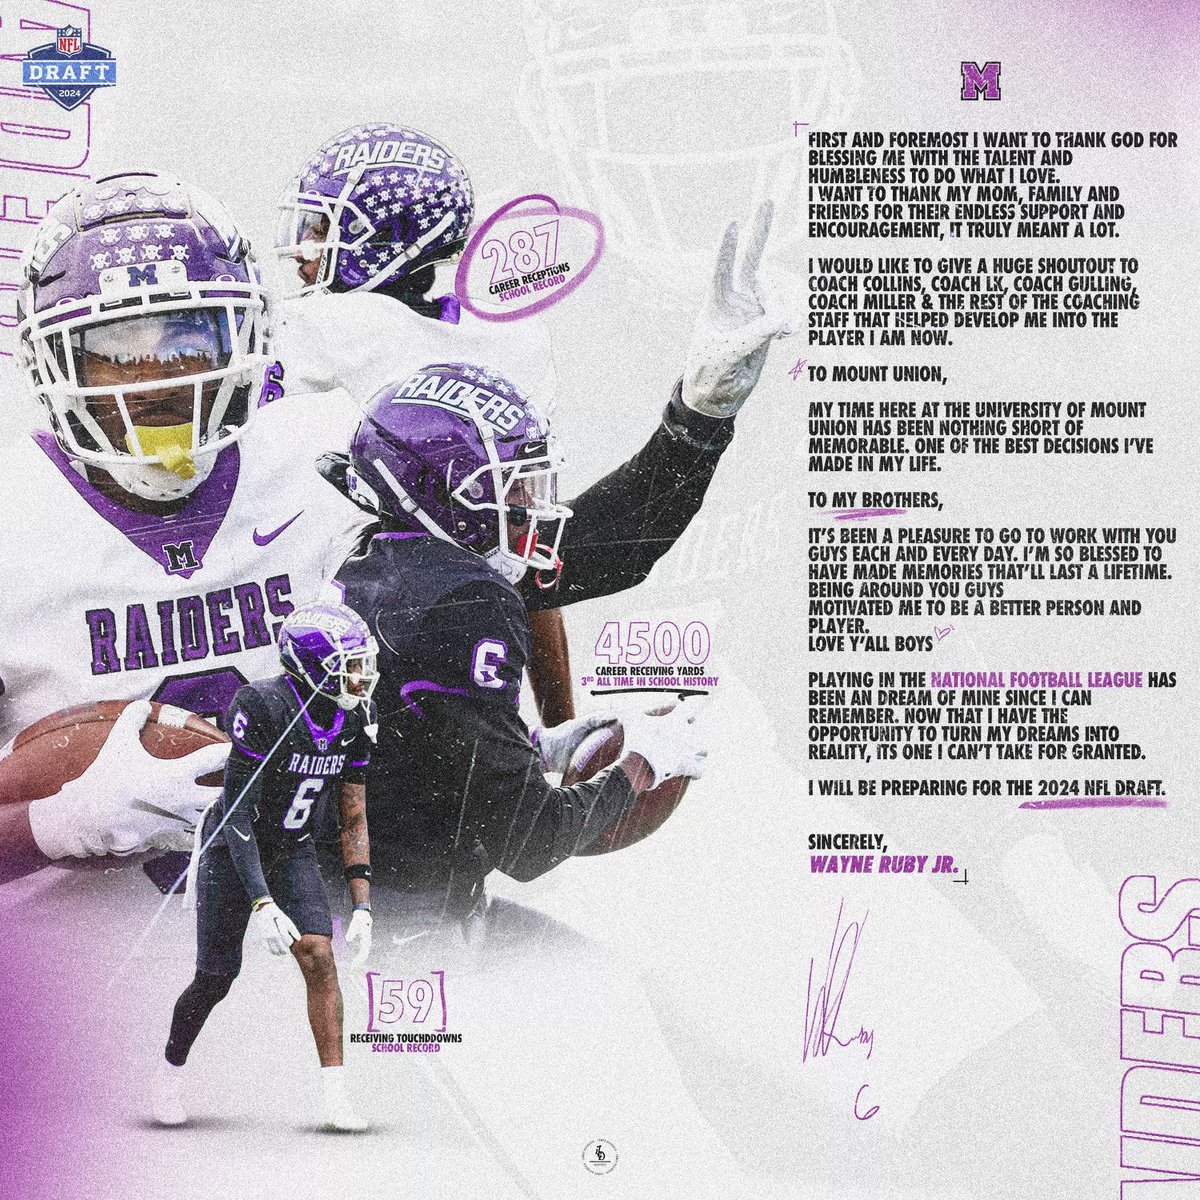 Raider nation Thank you @purpleraiders @MountUnionFB 💜 Jeremiah 29:11 “For I know the plans I have for you,' declares the LORD, 'plans to prosper you and not to harm you, plans to give you hope and a future.'